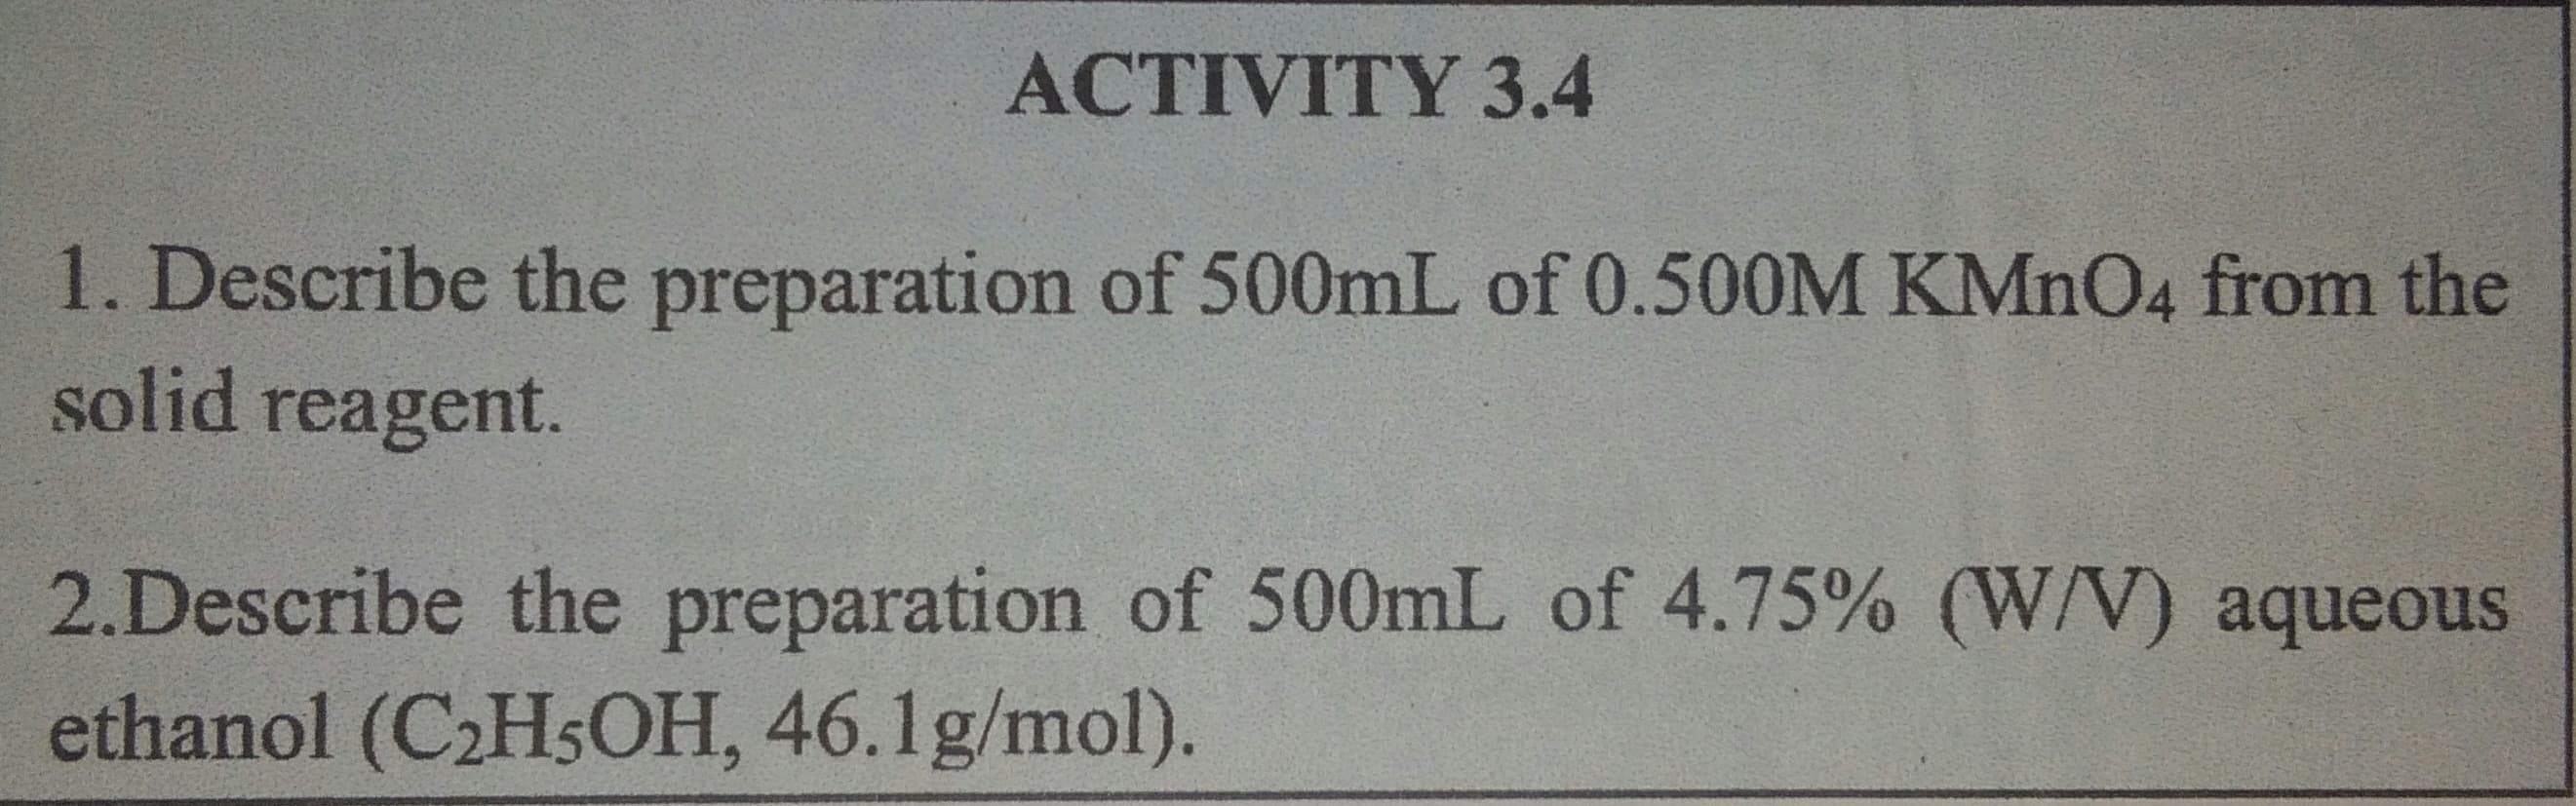 1. Describe the preparation of 500mL of 0.500M KMNO4 from the
solid reagent.
2.Describe the preparation of 500mL of 4.75% (W/V) aqueous
ethanol (C2H5OH, 46.1g/mol).
